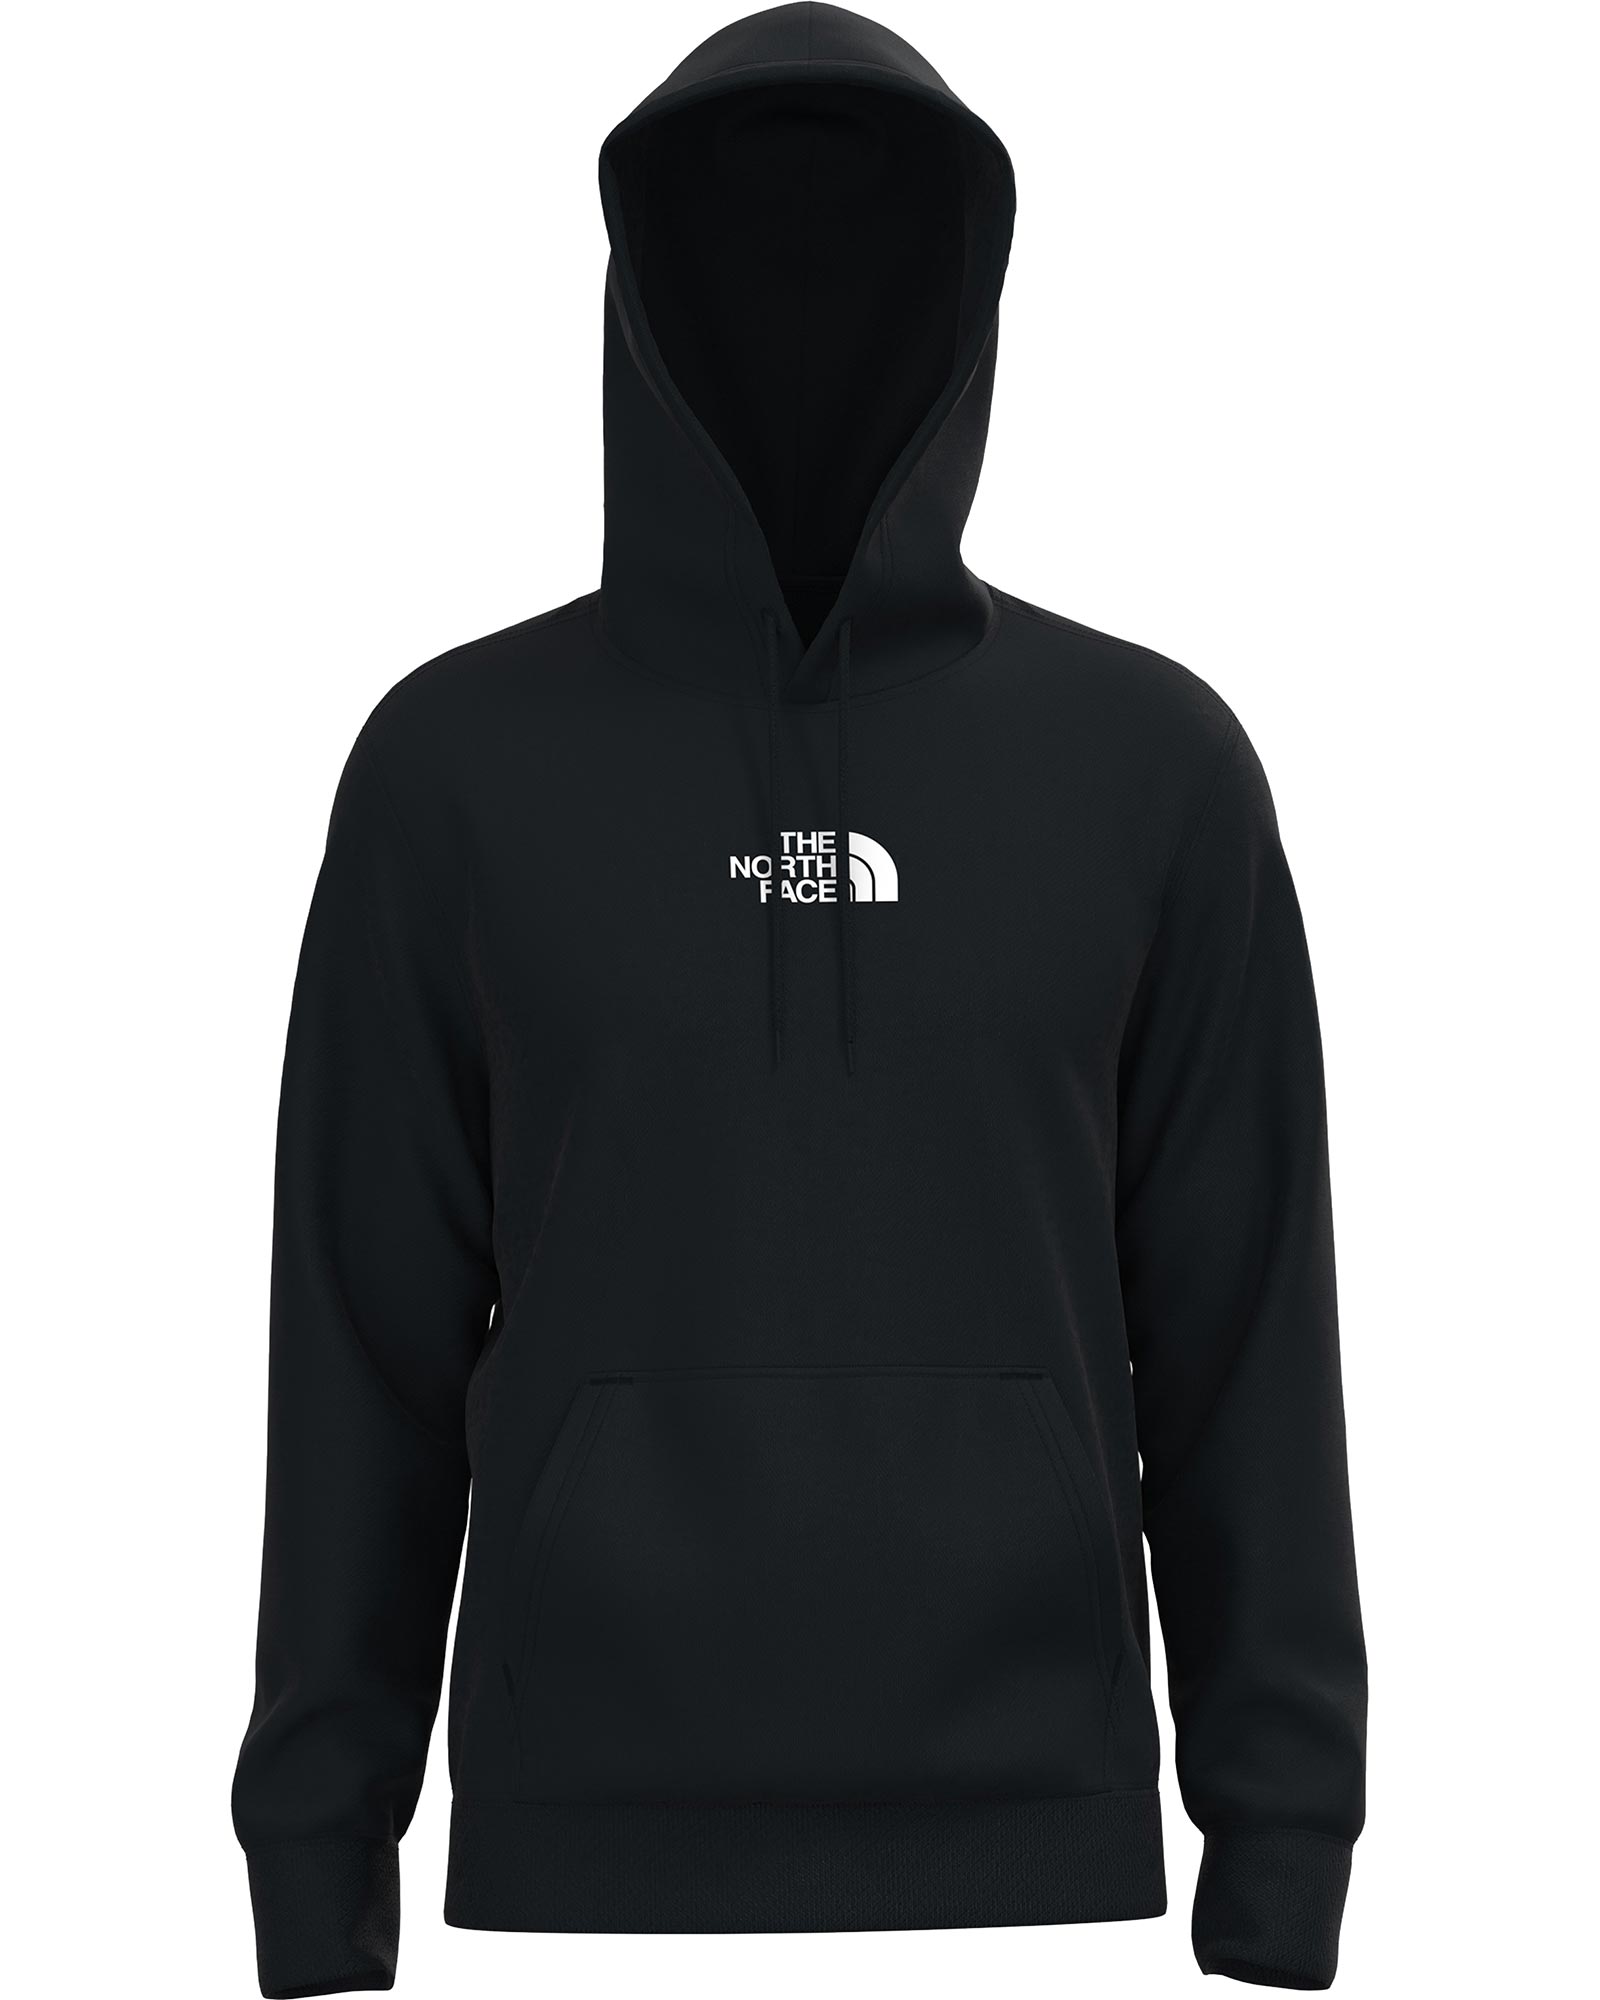 The North Face IC Men’s Hoodie - TNF Black XS